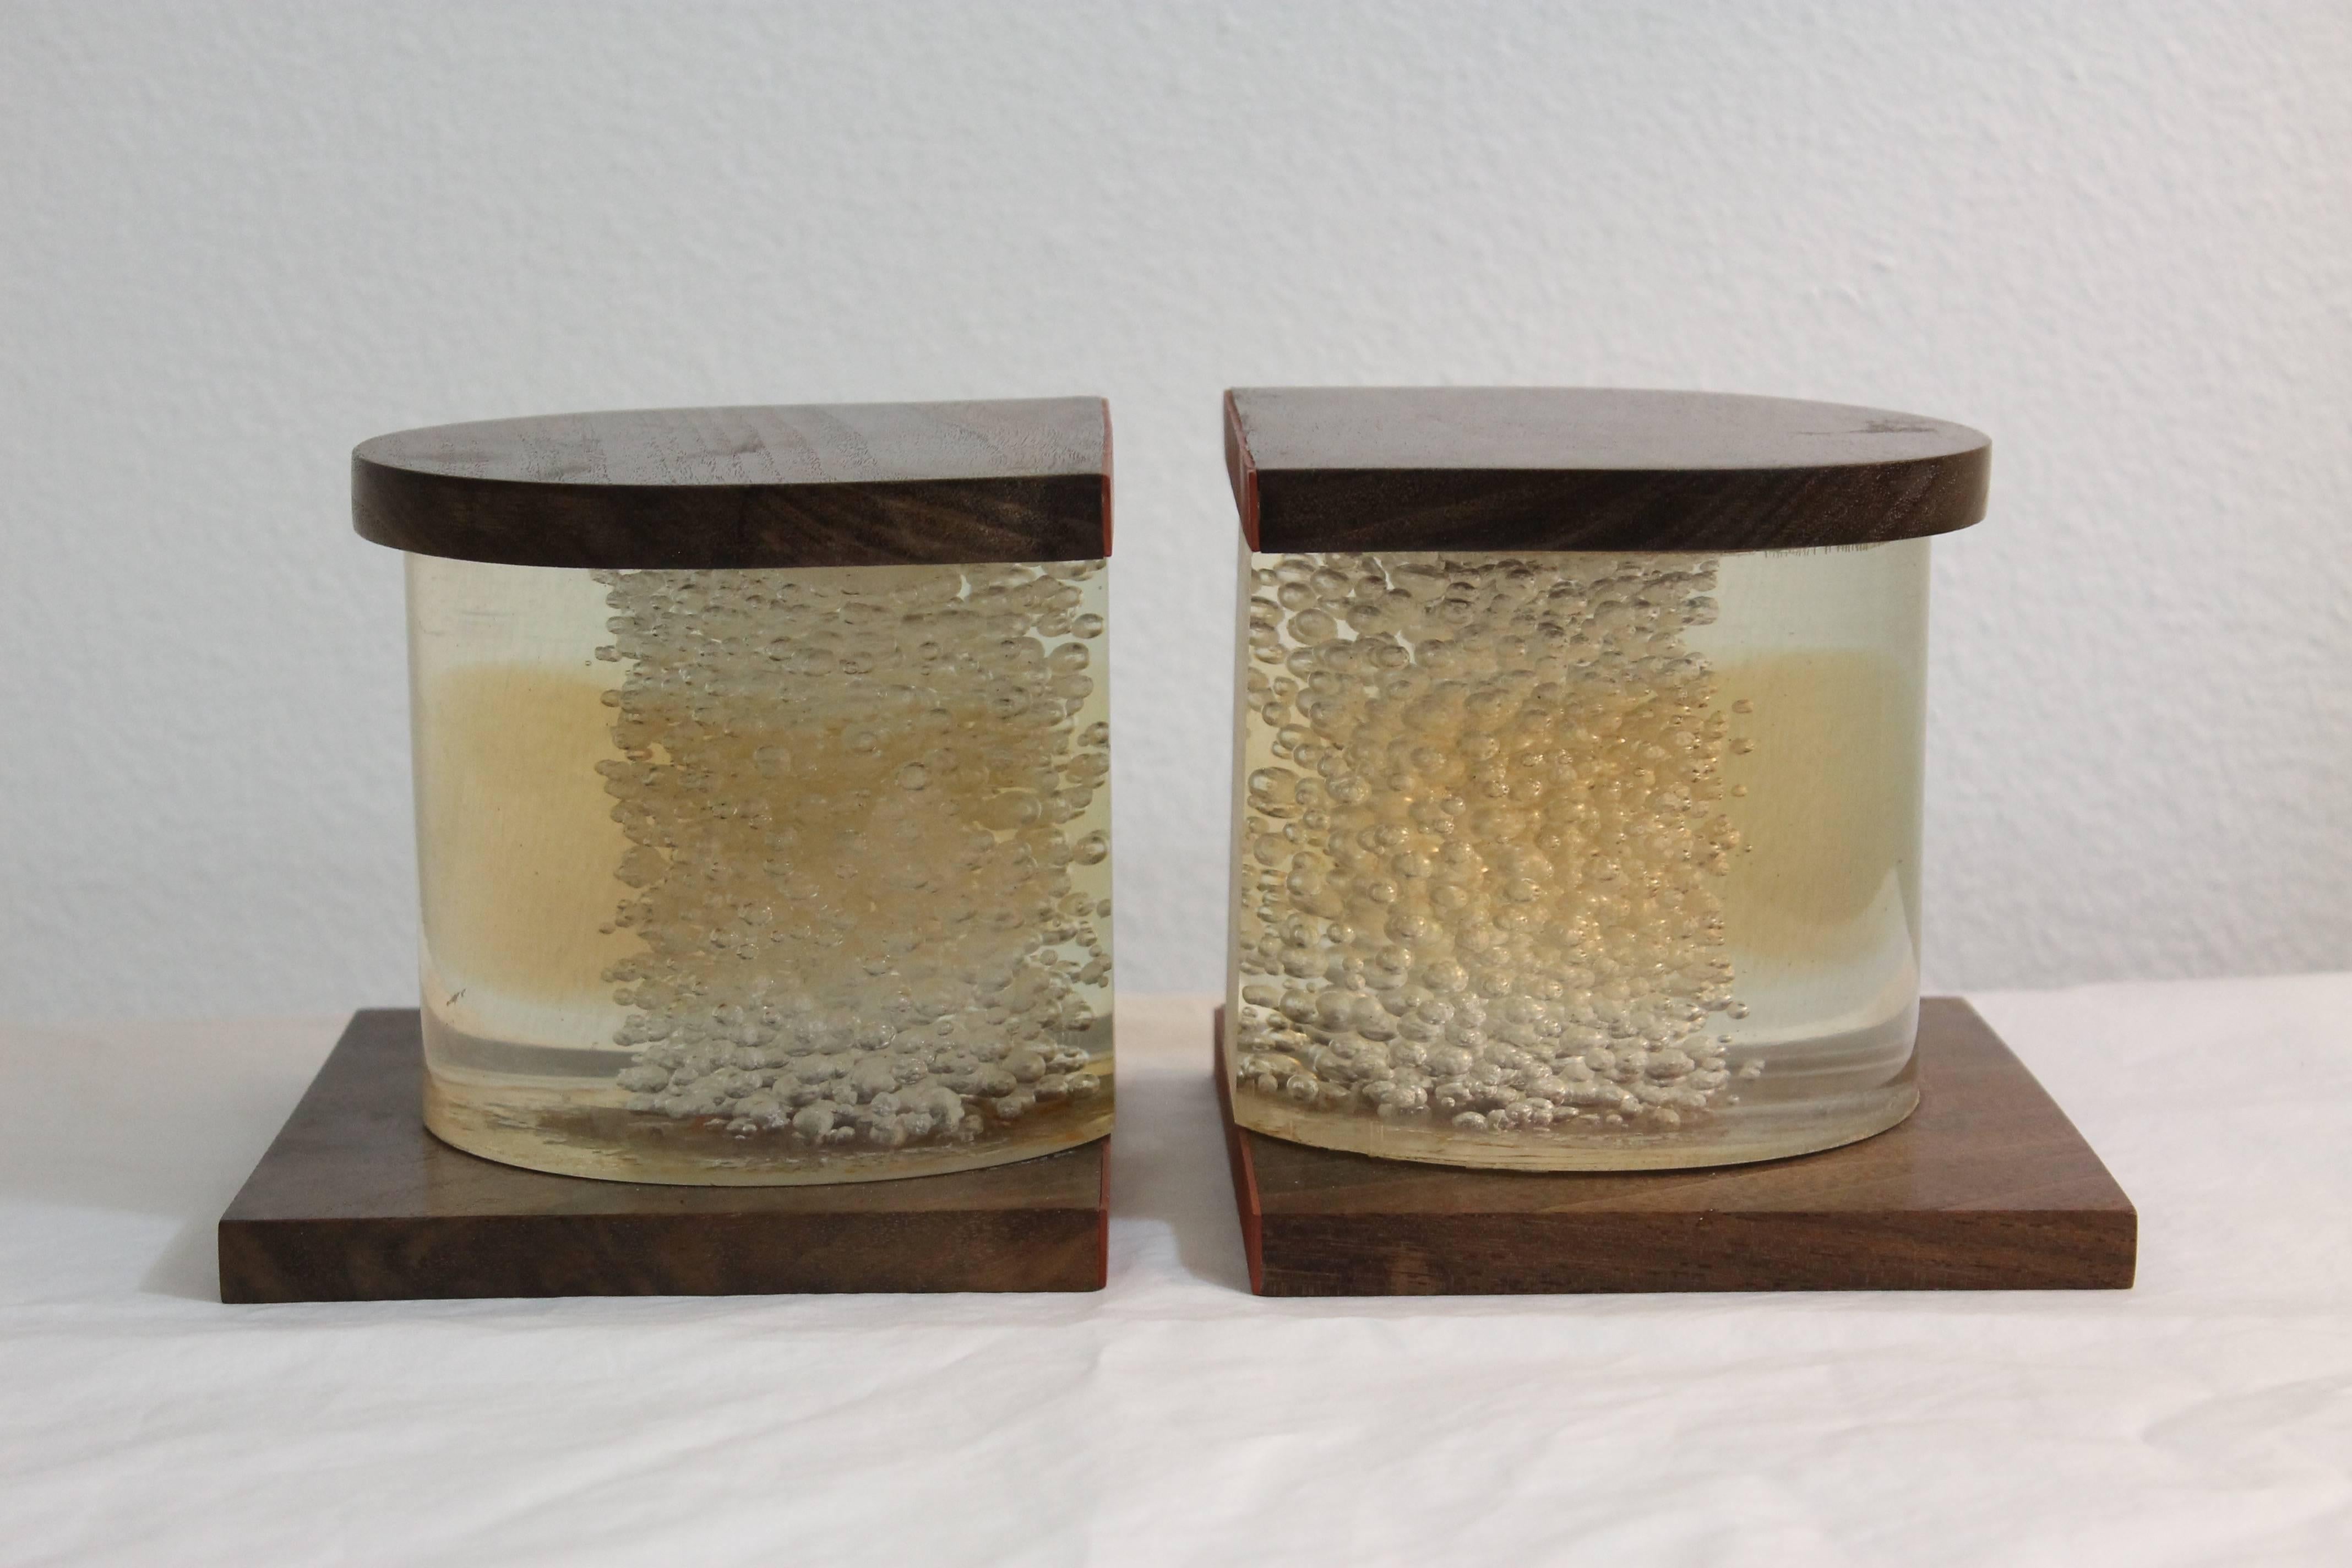 Pair of Lucite and wood bookends. Lucite looks like it has suspended bubbles. They each measure 5.5